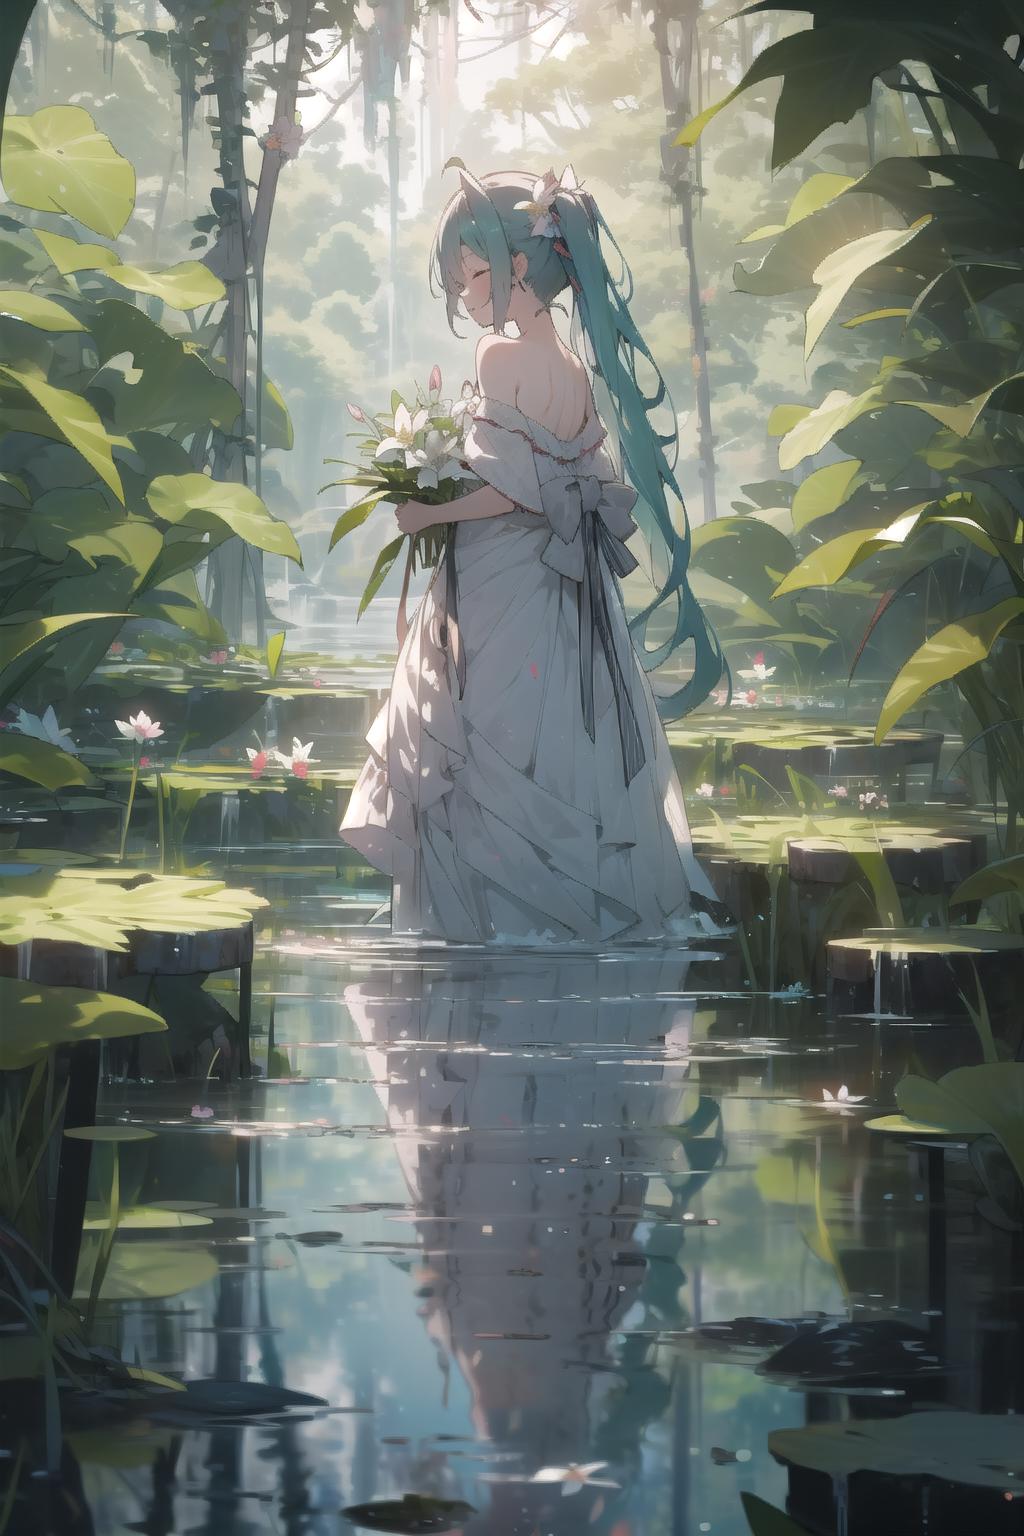 "Fantasy Art: A Woman in a Wedding Dress Carrying Flowers in a Swampy Environment"